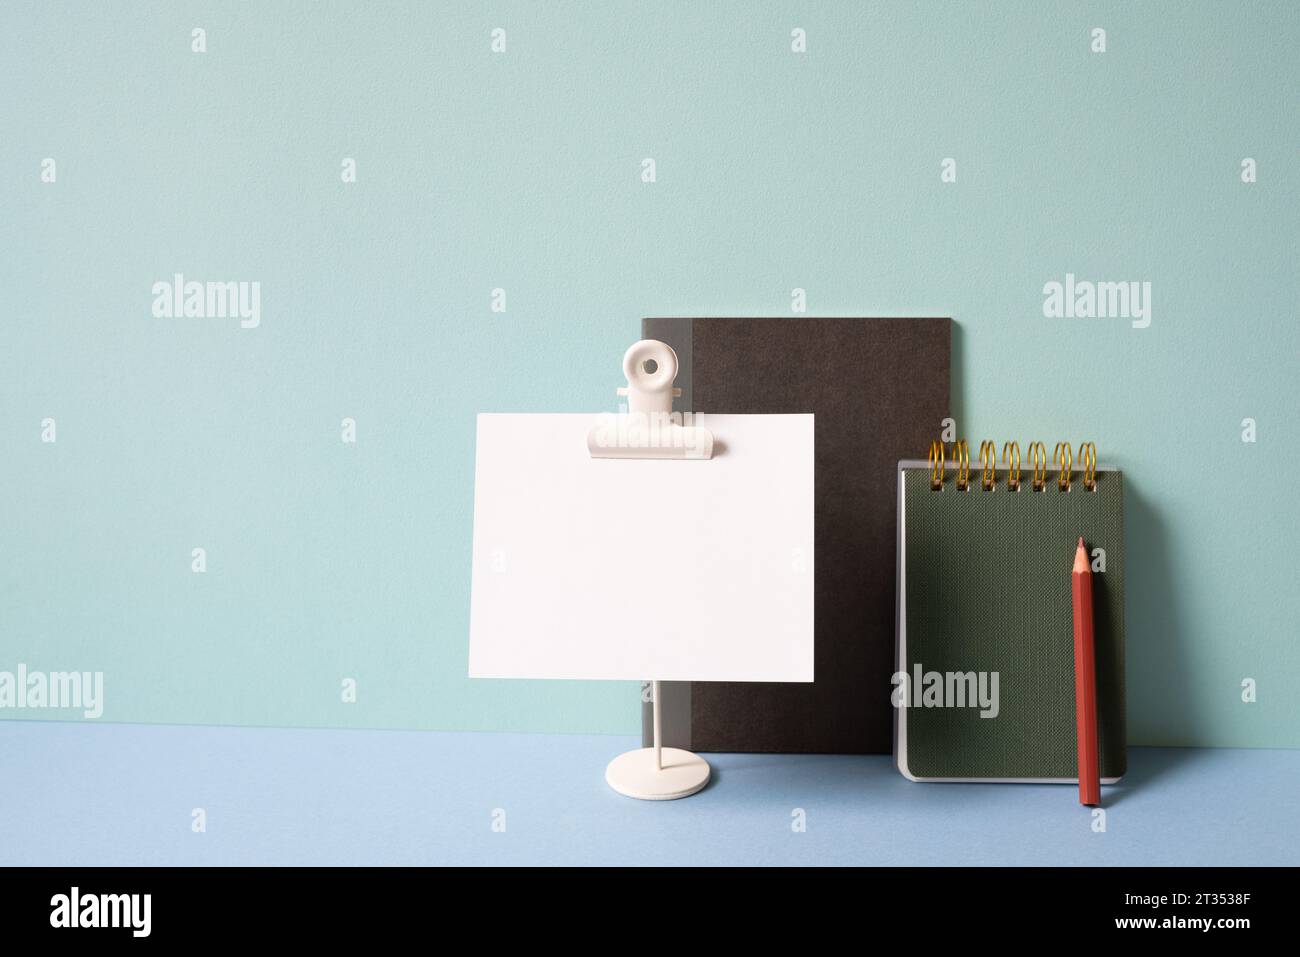 Notebook, memo pad, colored pencil on blue desk. mint green background. study and workspace Stock Photo